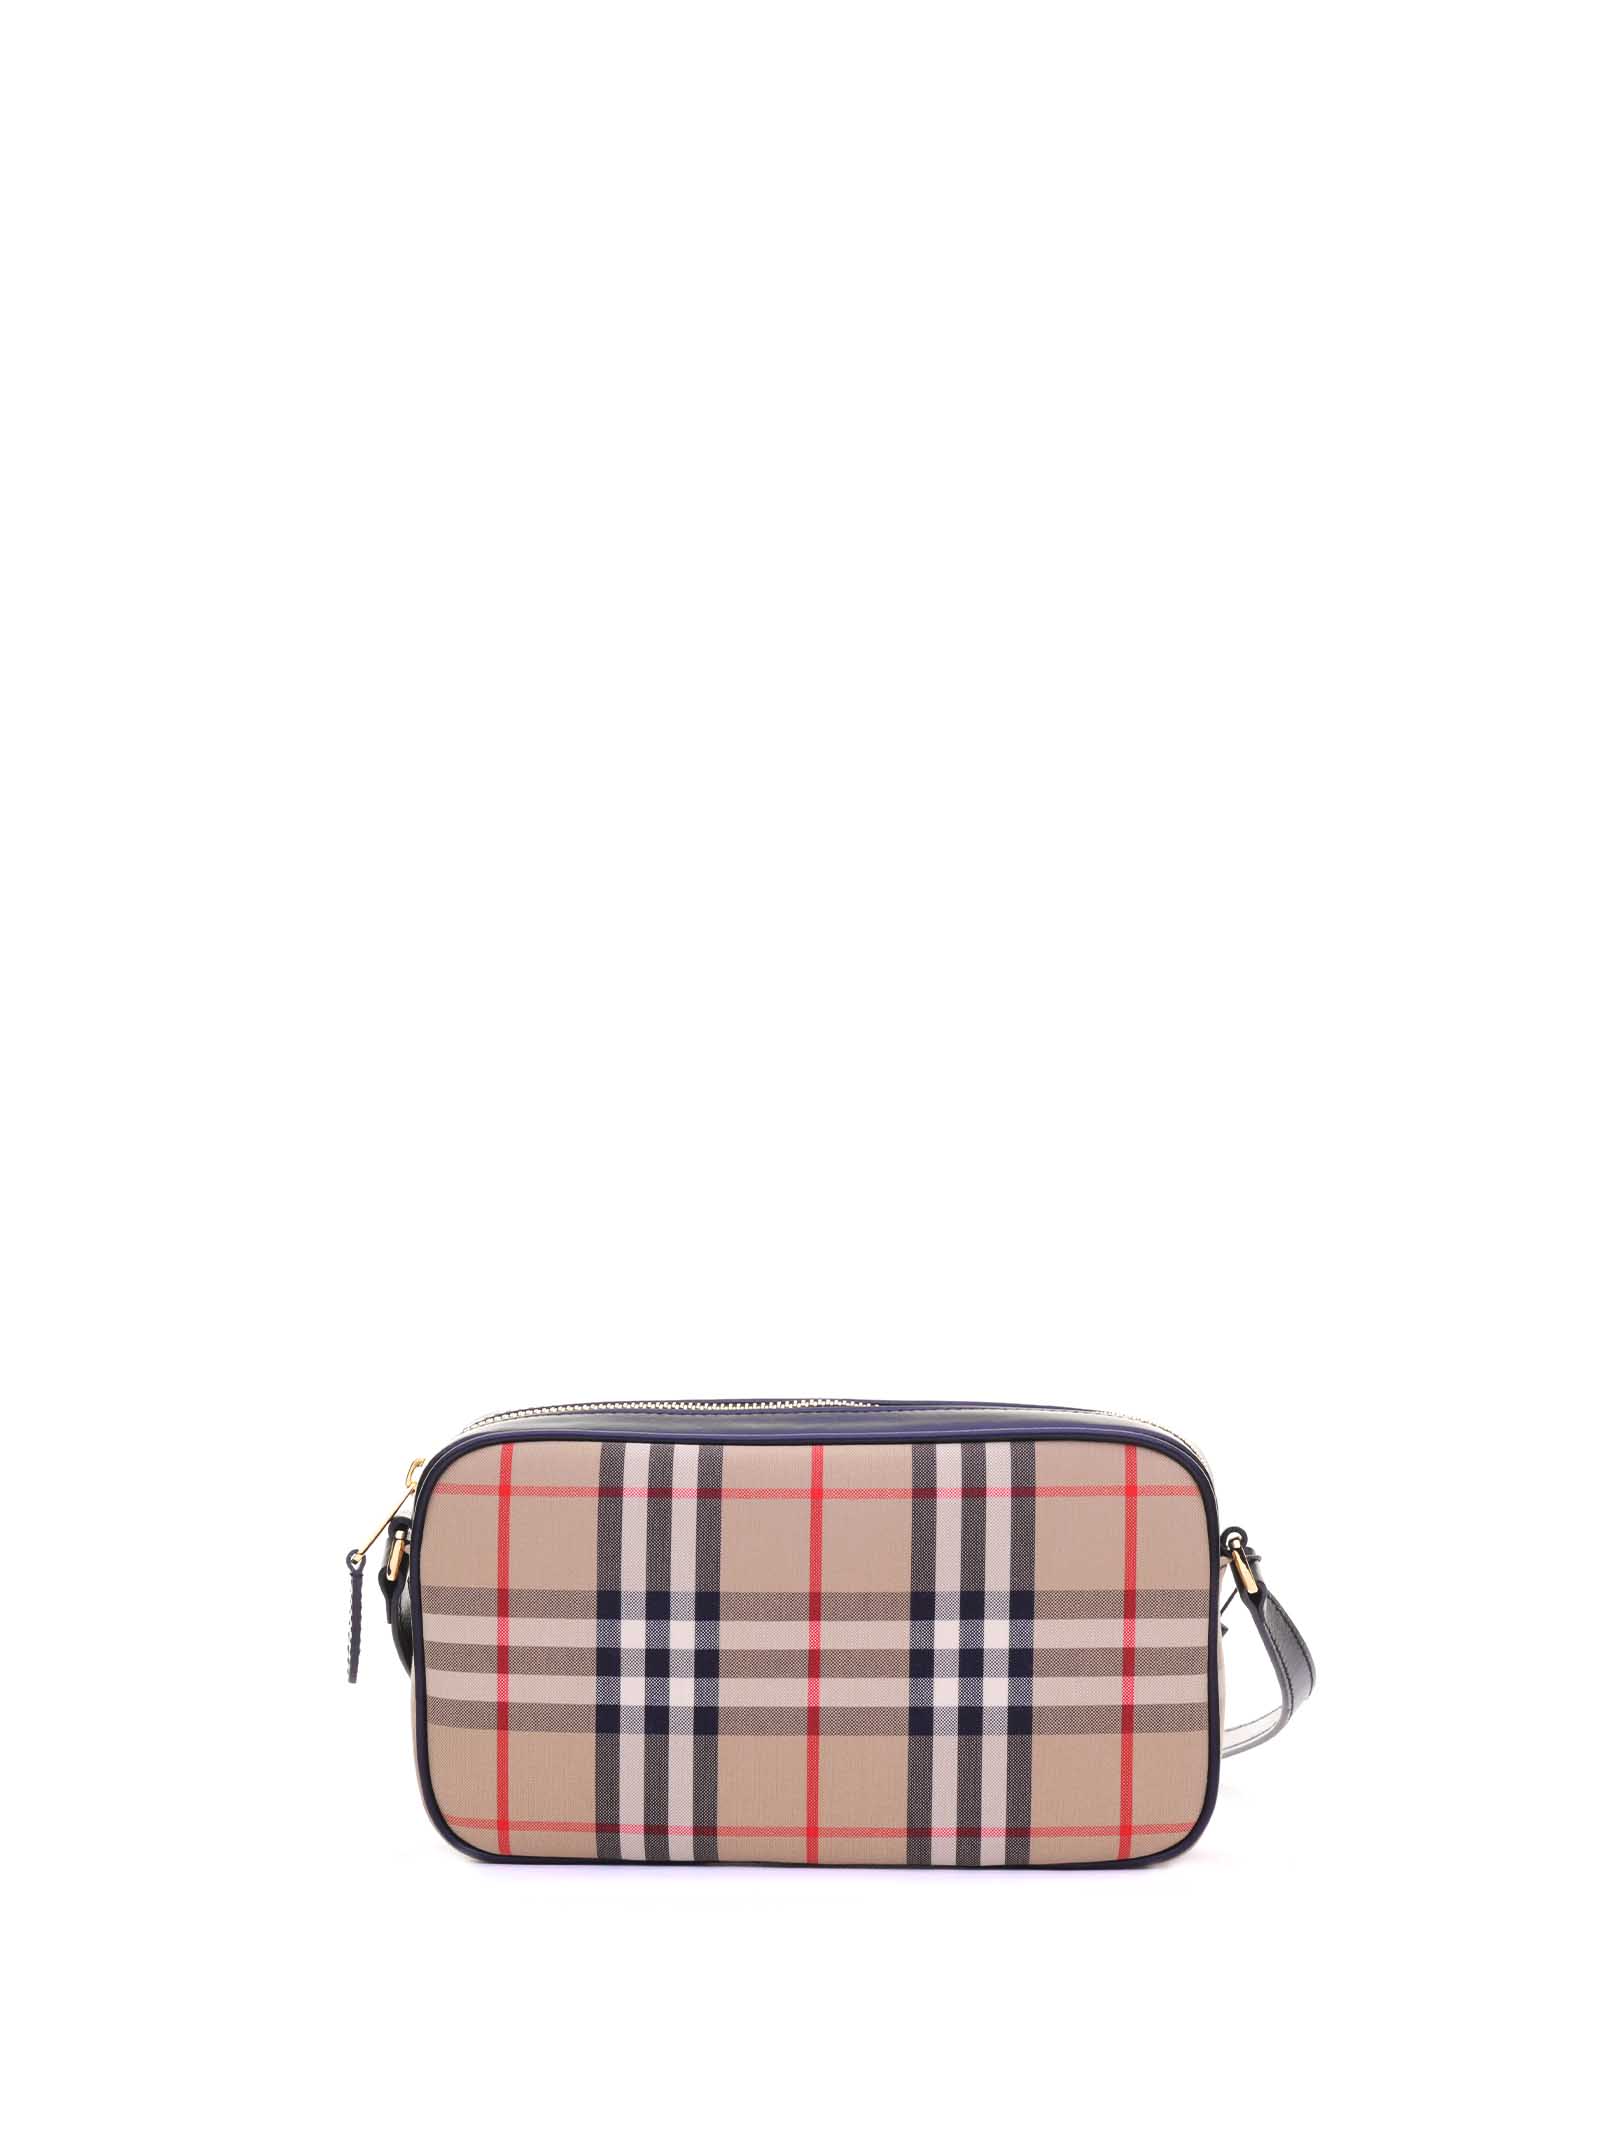 Burberry Vintage Check Camera Bag In Archieve Beige